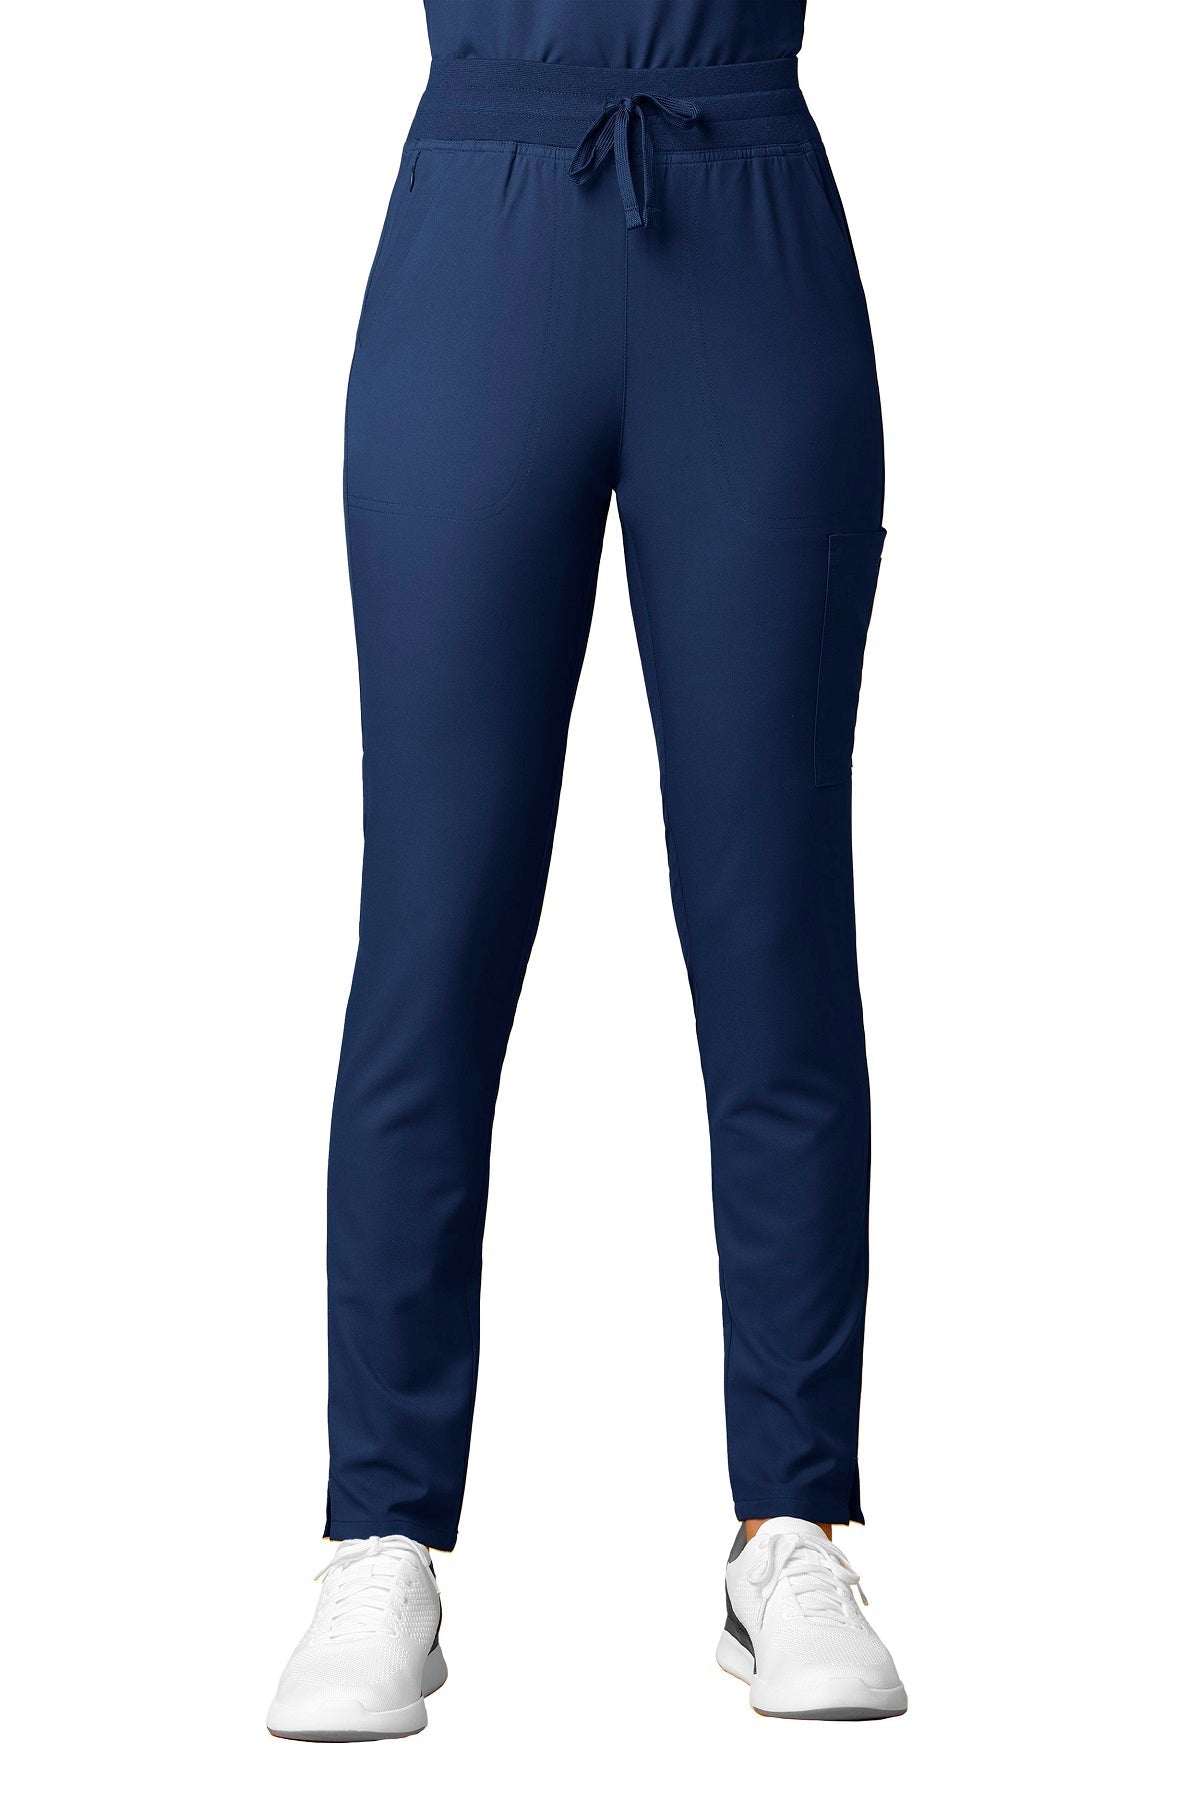 WonderWink Scrub Pants Thrive Cargo Straight Slim petite length in navy at Parker's Clothing and Shoes.